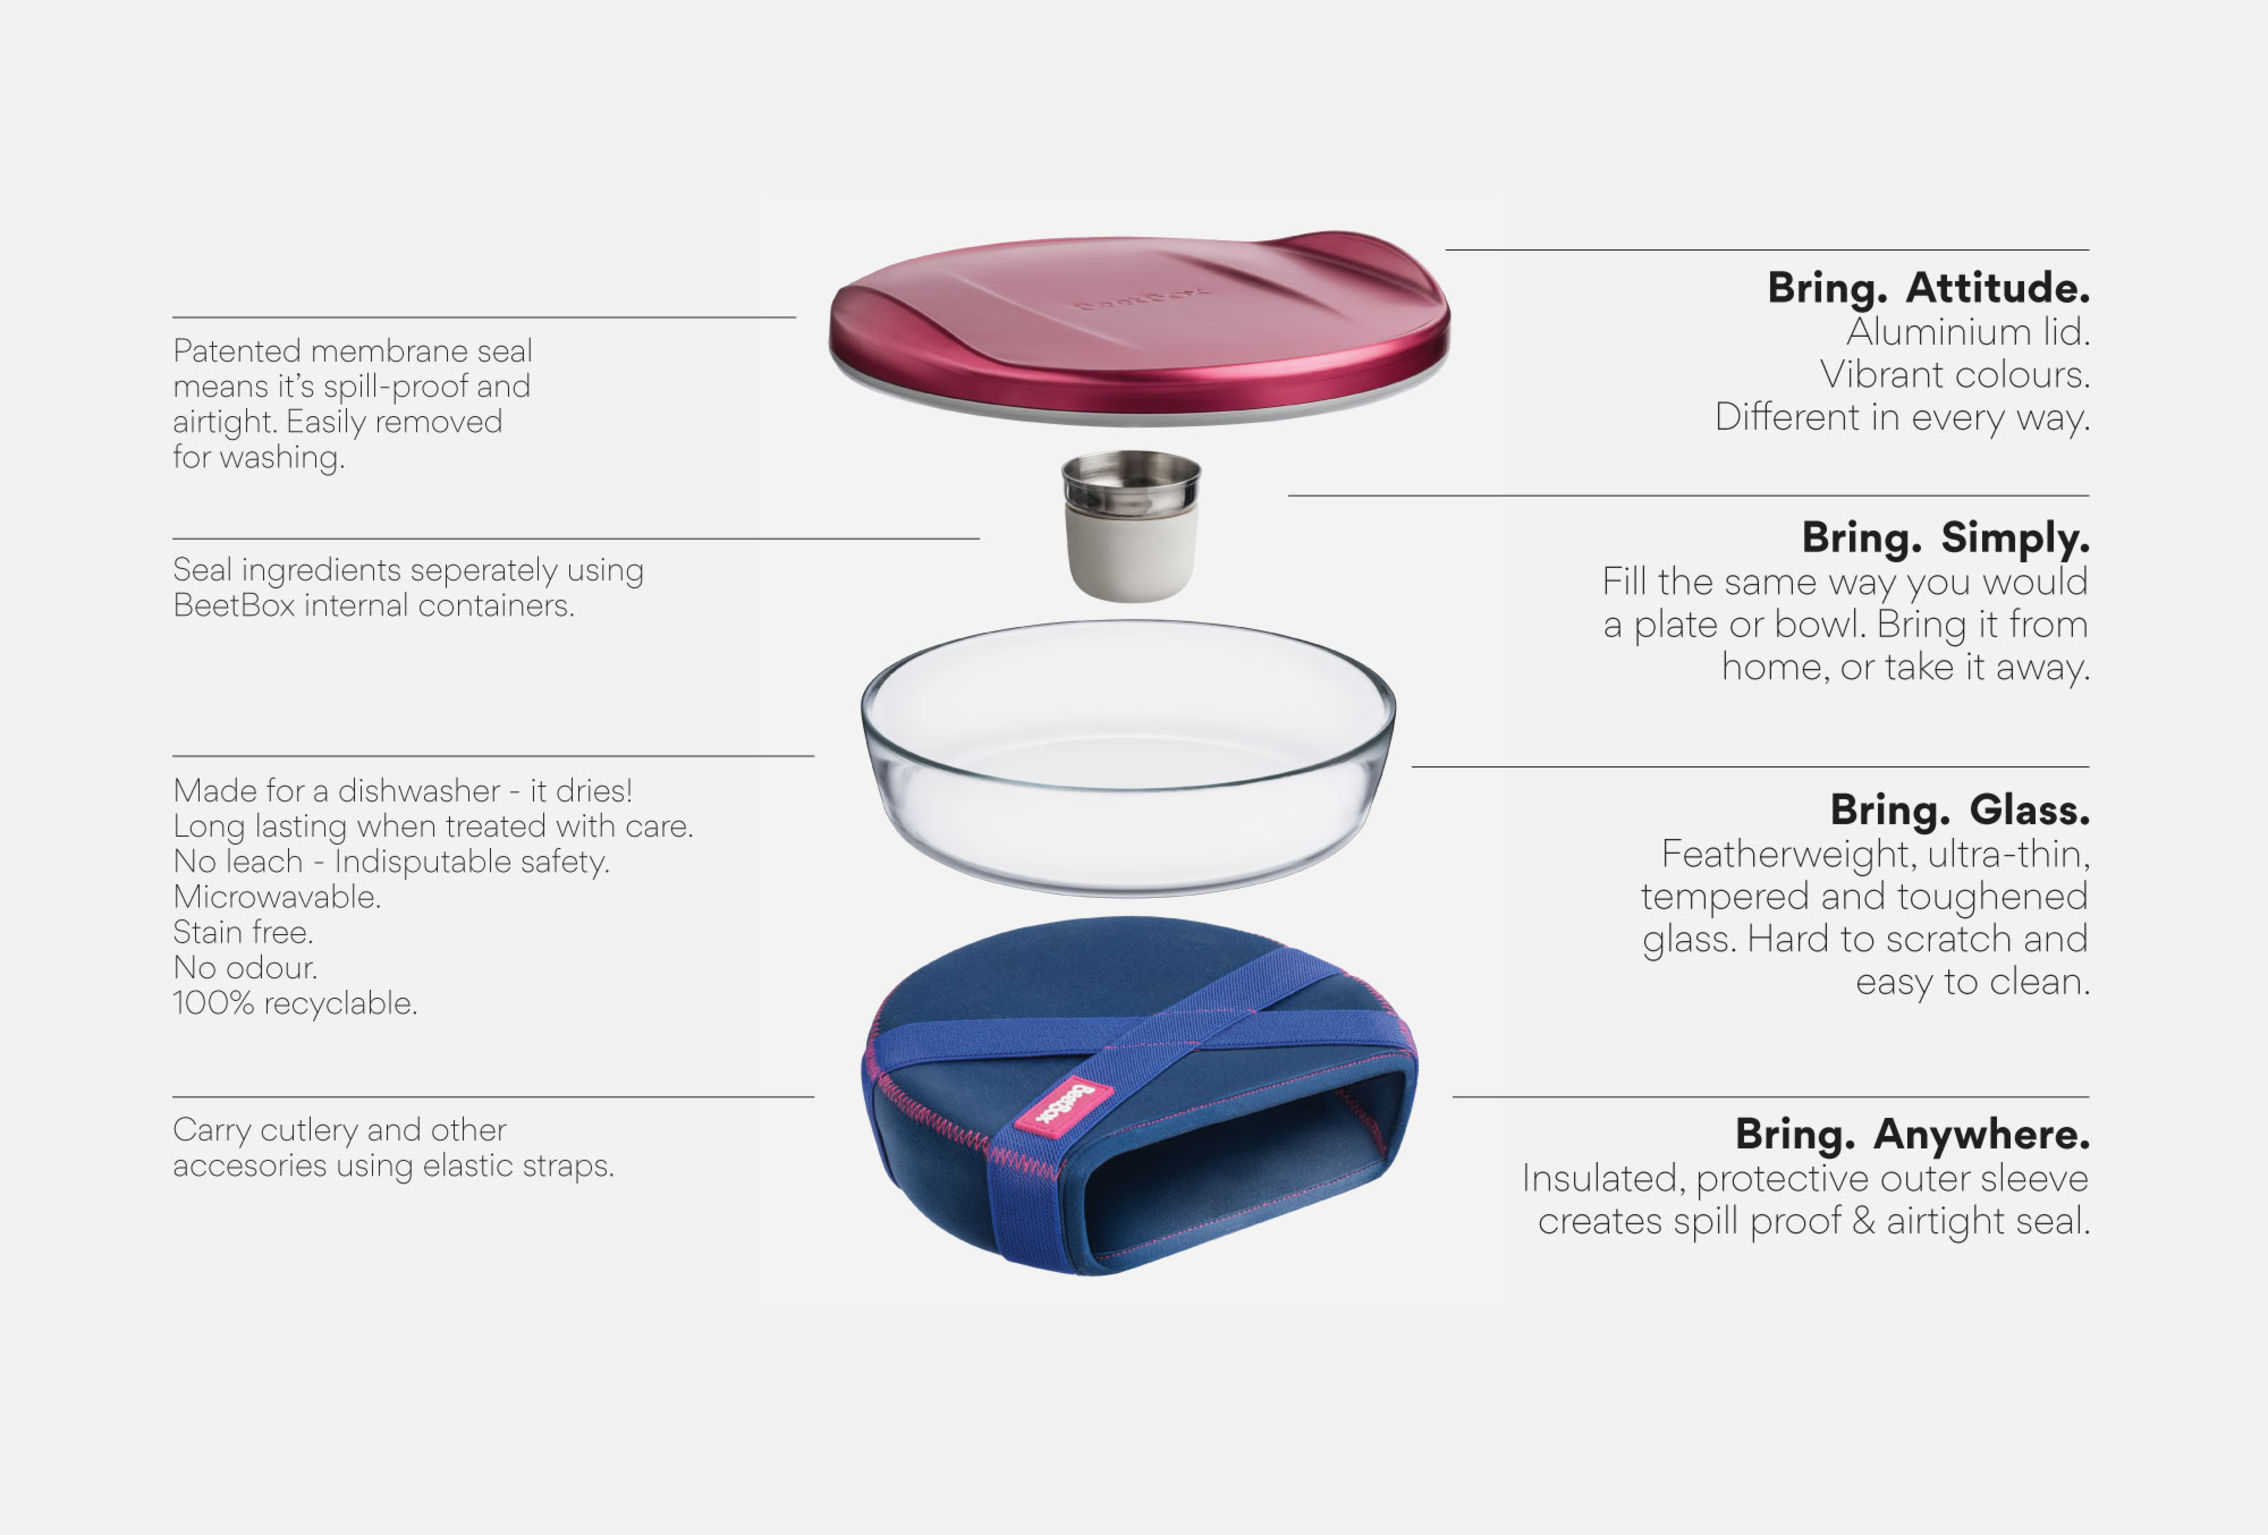 BeetBox - the first portable Glass Lunch Bowl